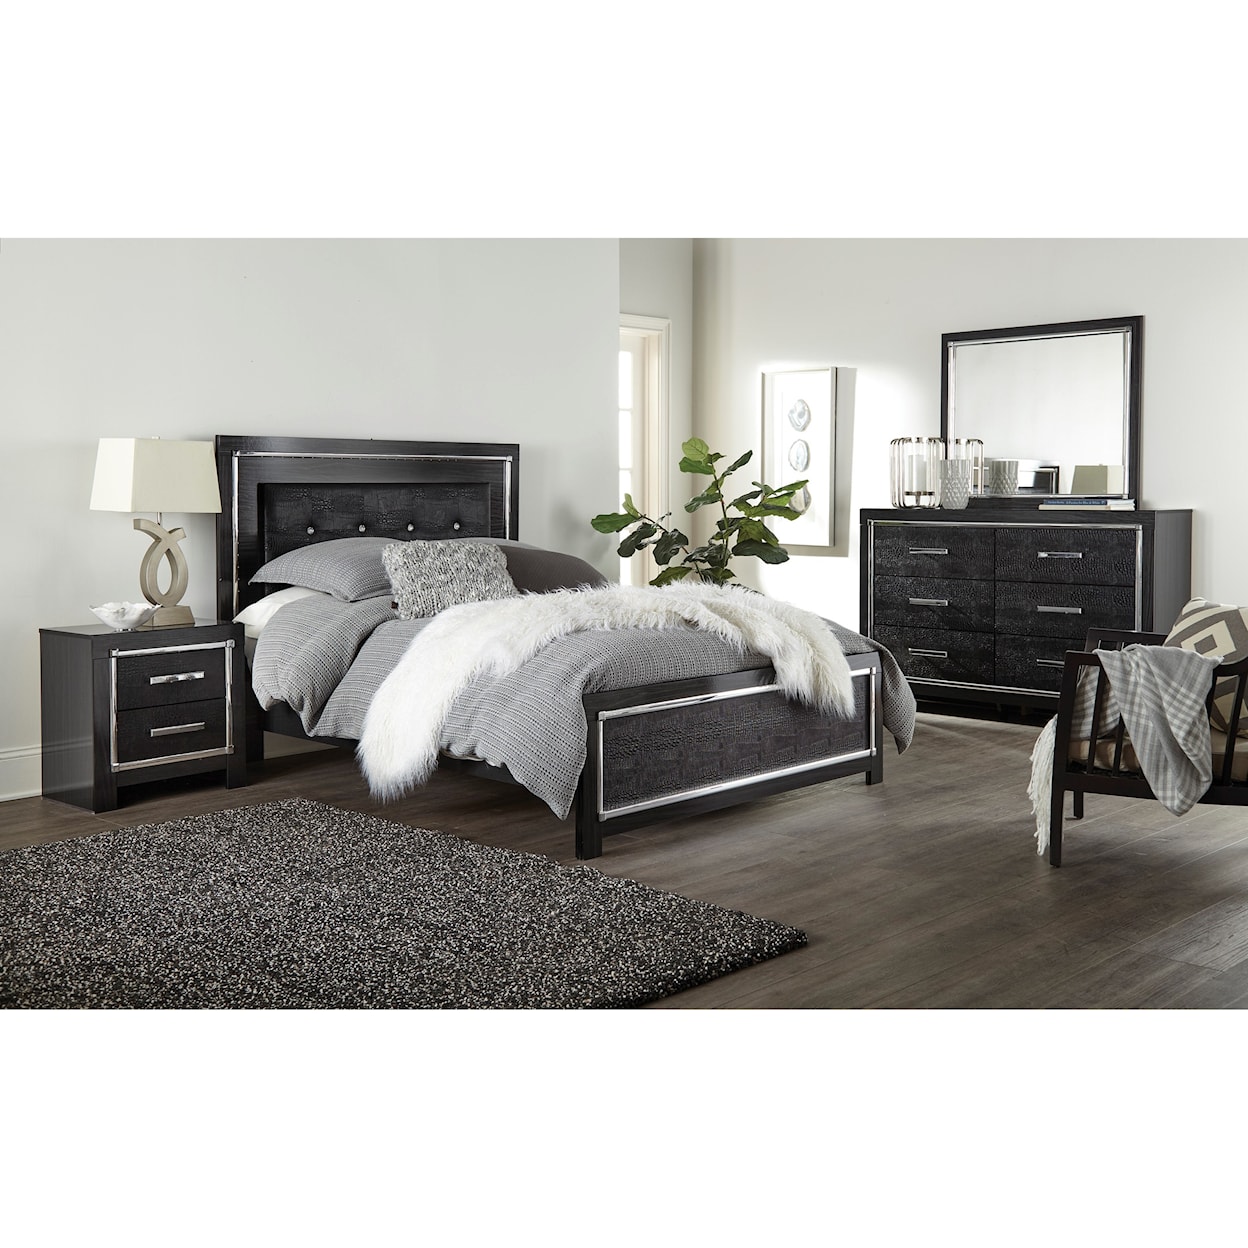 Signature Design by Ashley Furniture Kaydell King Bedroom Group